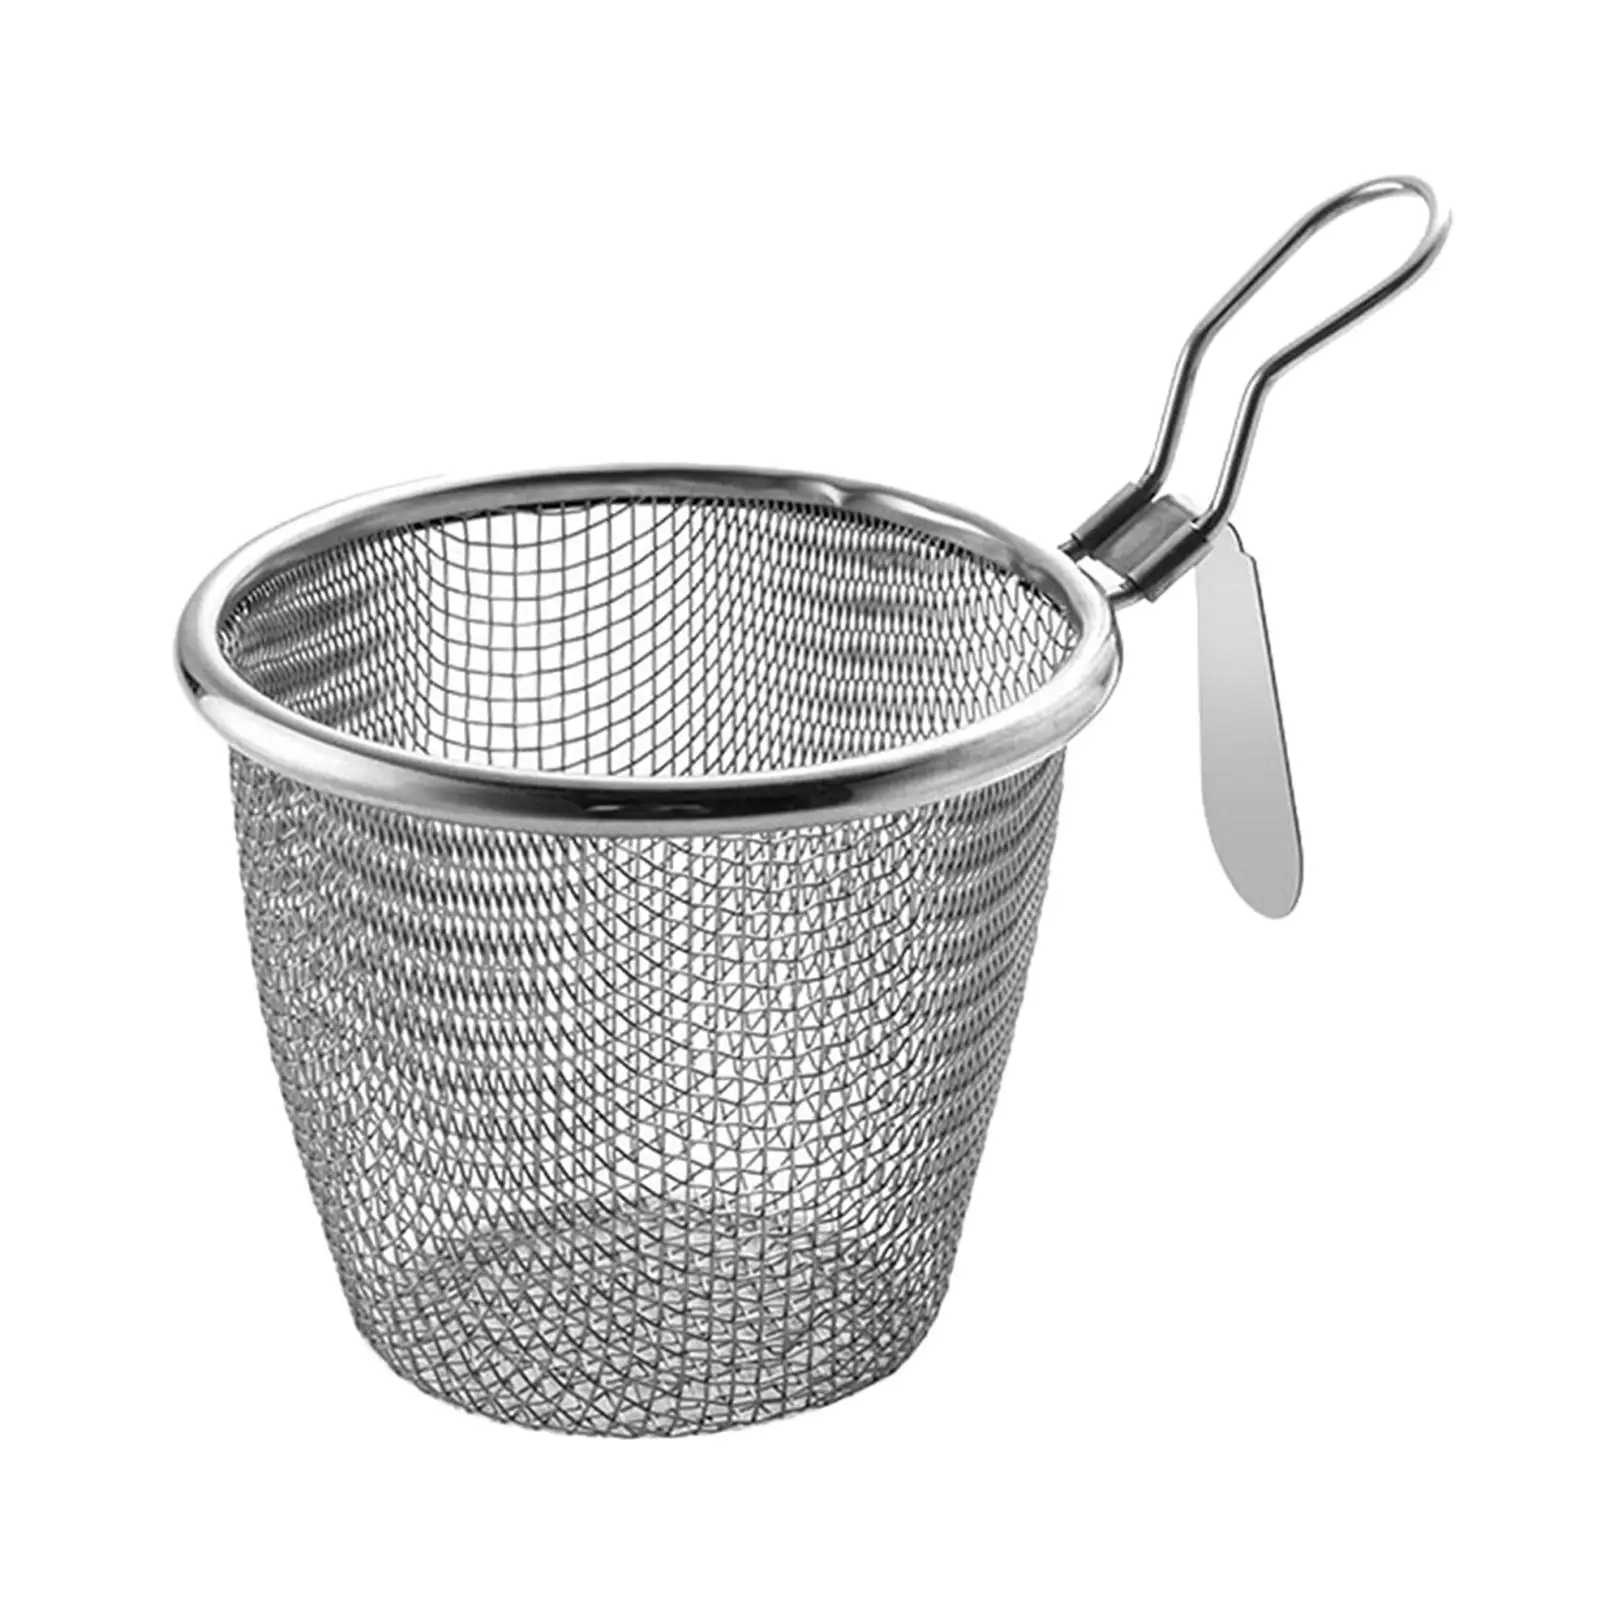 Stainless Steel Mesh Strainer with Handle Pasta Boil Basket Food Colander for Camping Noodles Home Accessory Frying Pasta